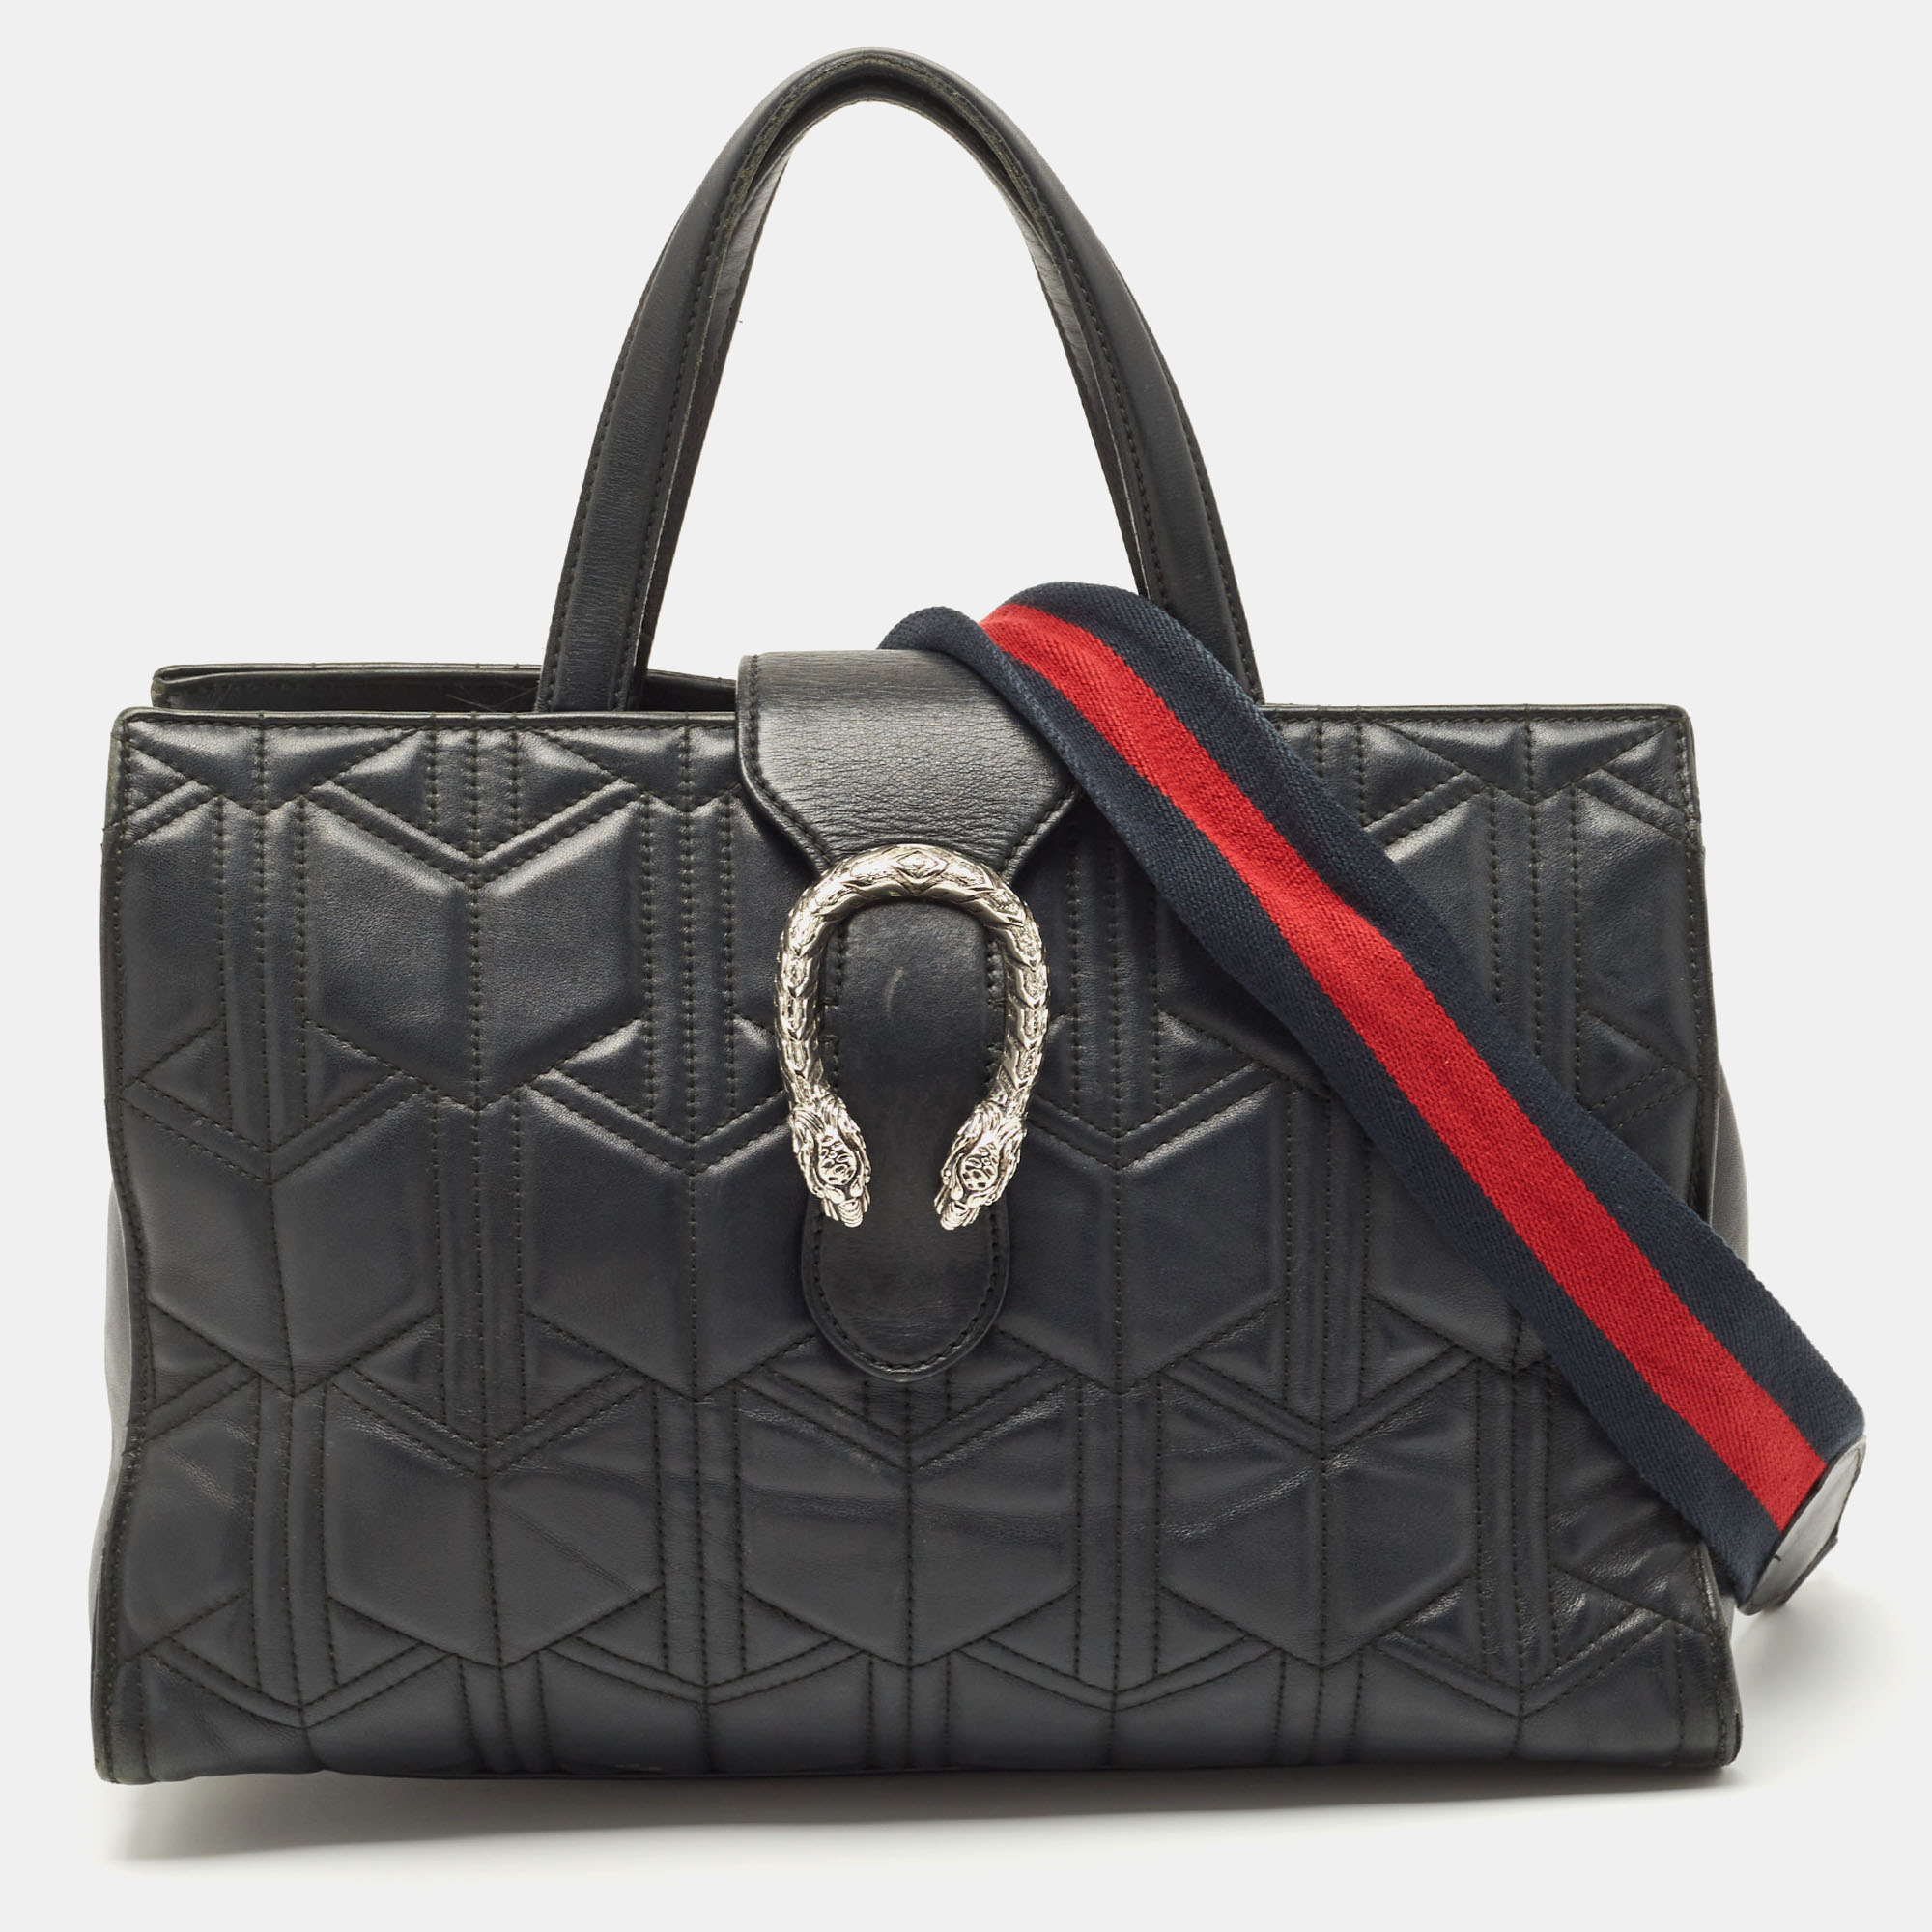 Gucci black quilted leather dionysus flap tote